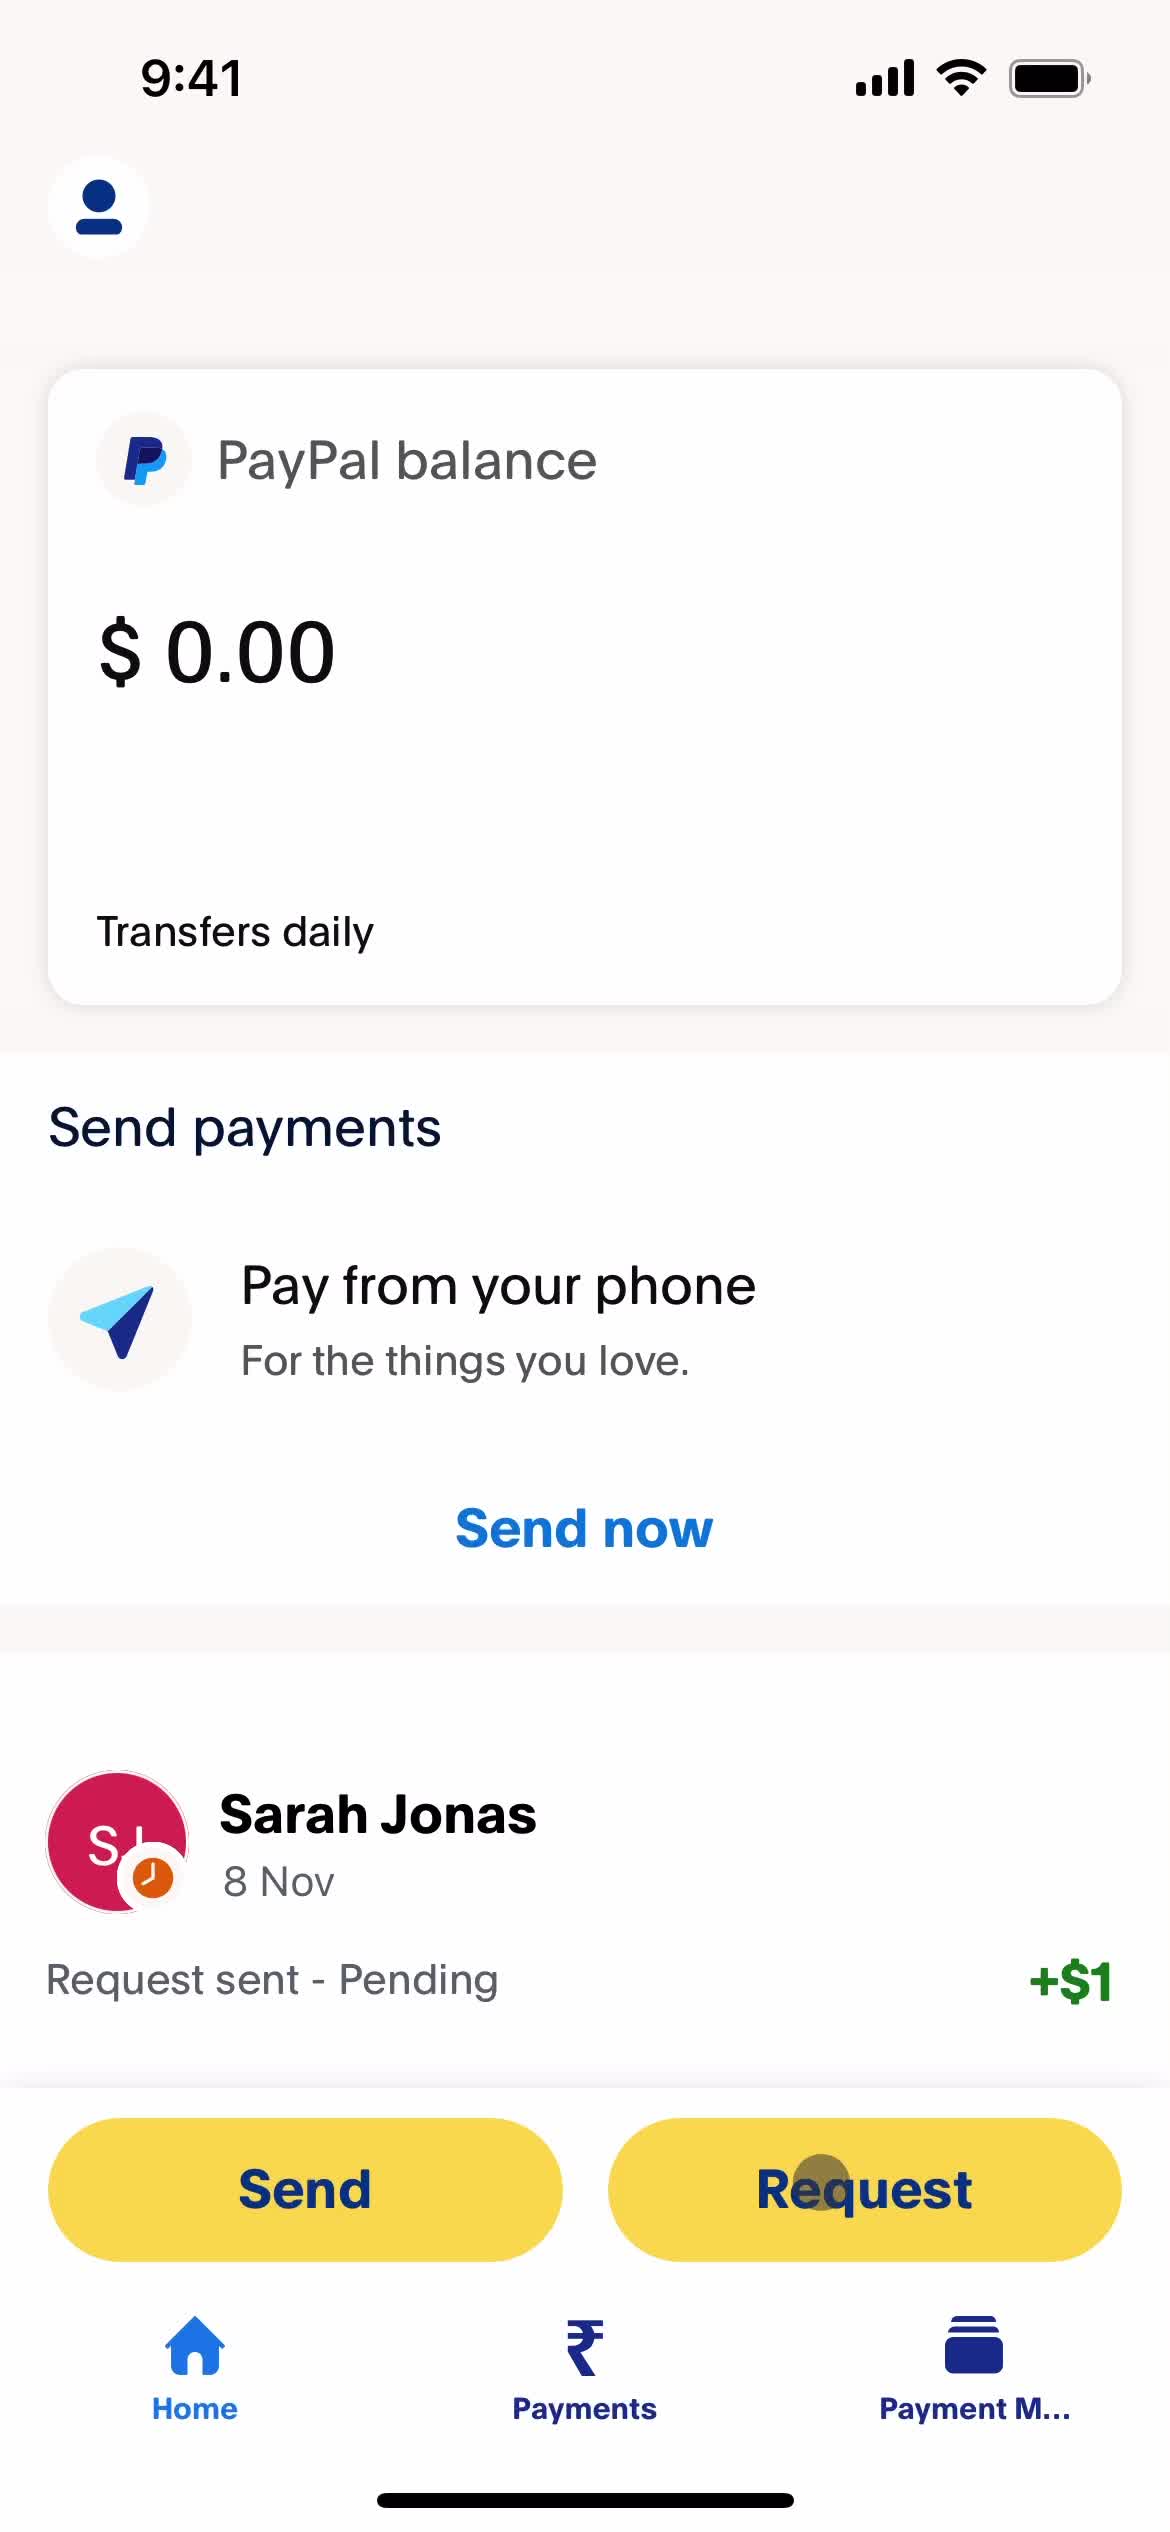 Screenshot of Request payment on Requesting payment on PayPal user flow